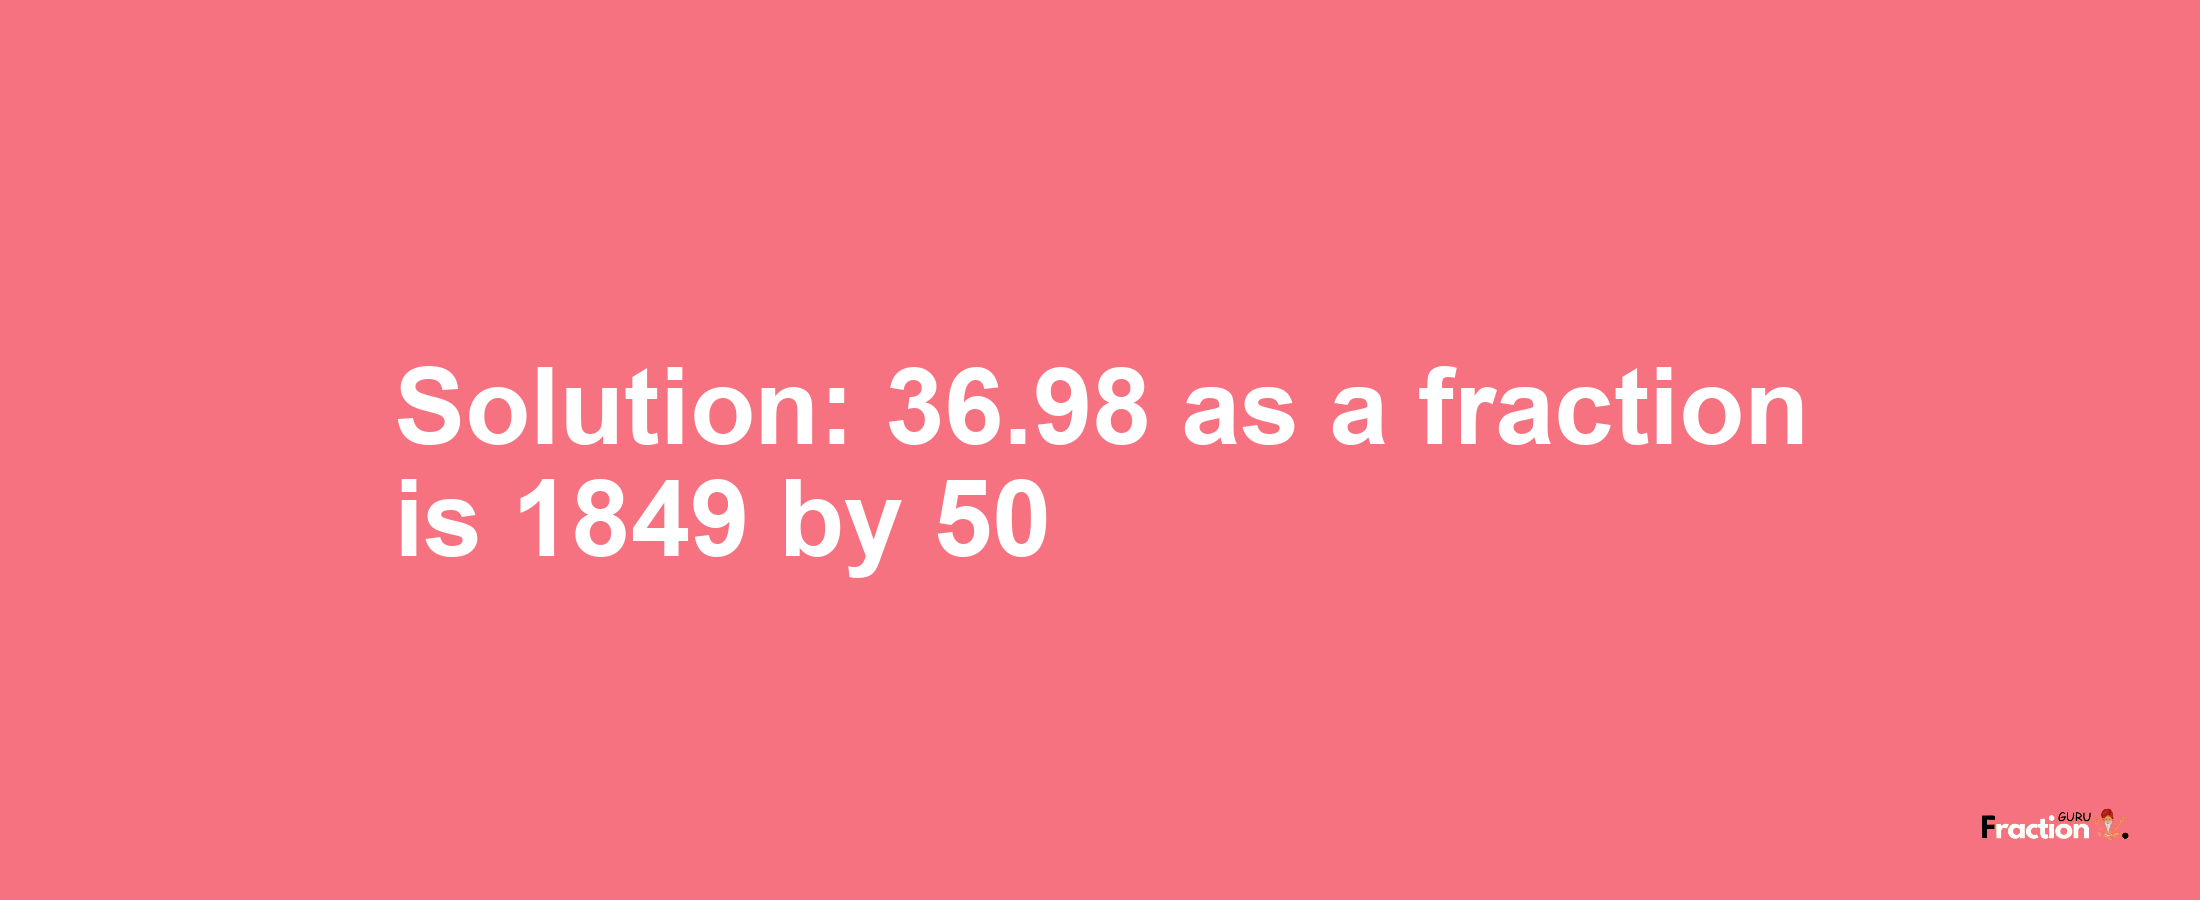 Solution:36.98 as a fraction is 1849/50